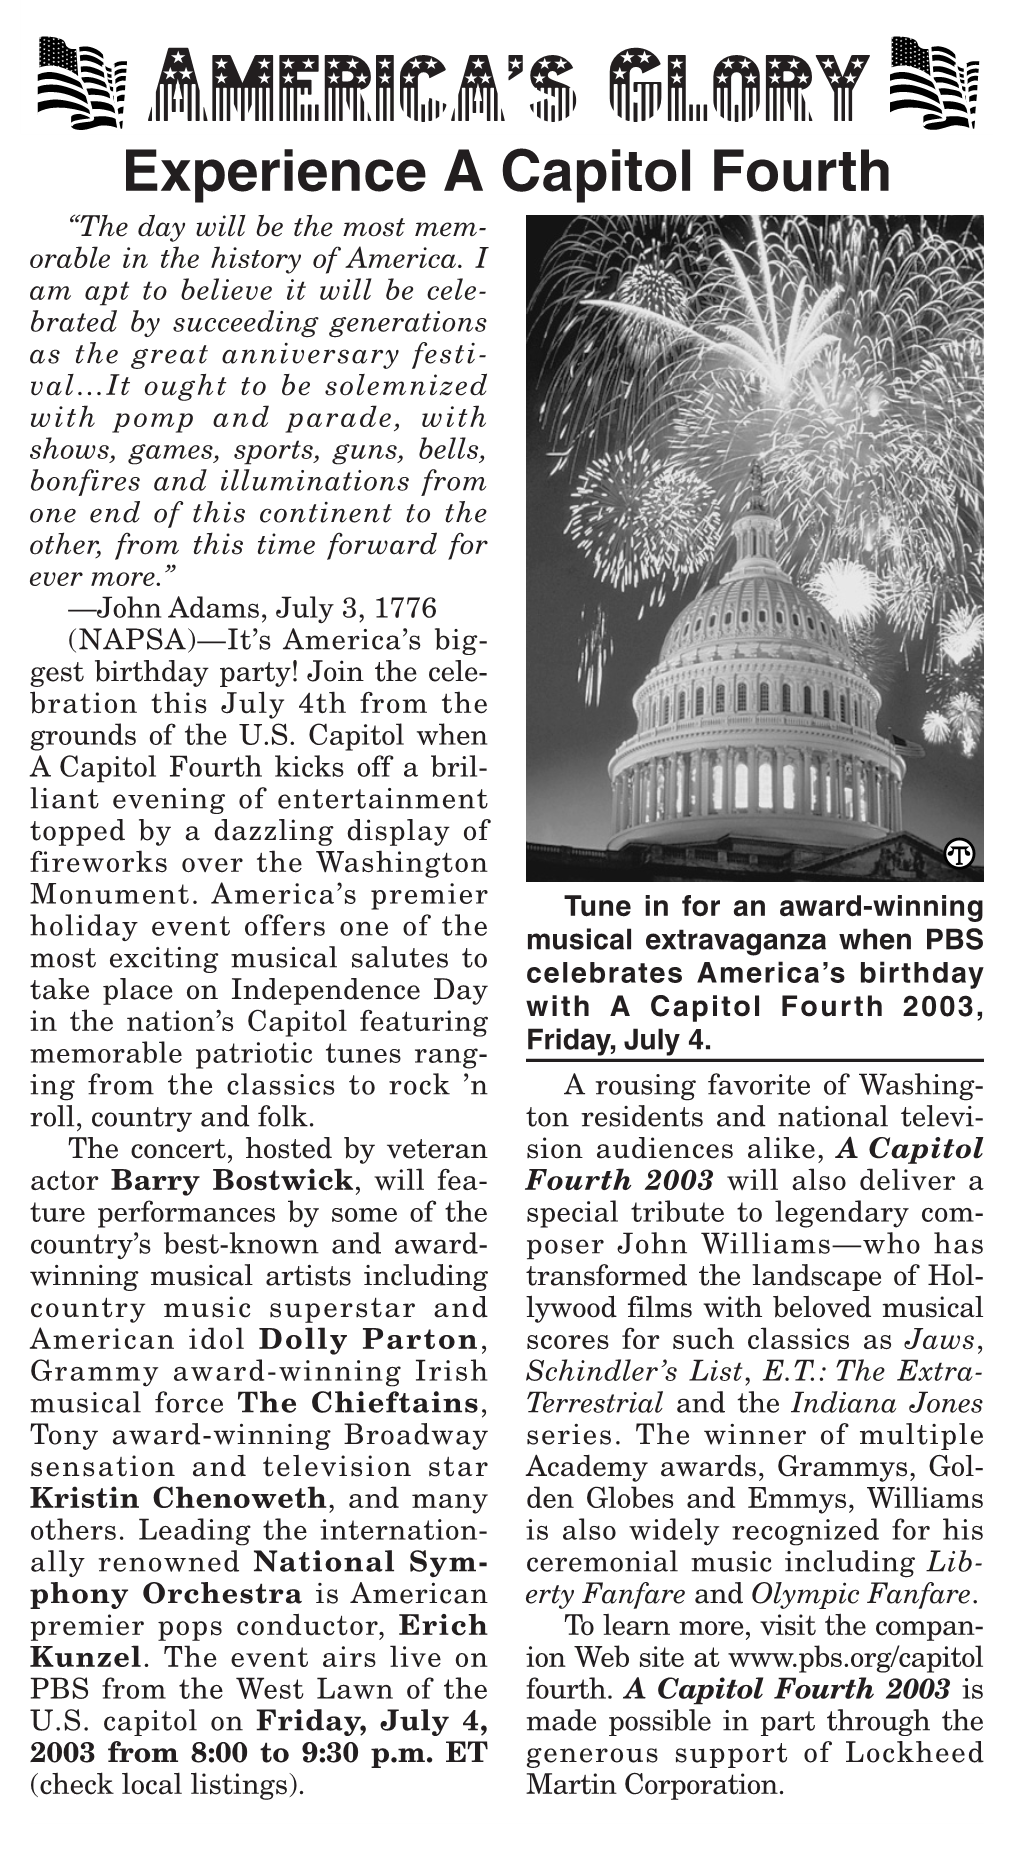 Experience a Capitol Fourth by Sergio Siderman Tips on Choosing a “The Day Will Be the Most Mem- Senior Vice President, COO and Orable in the History of America